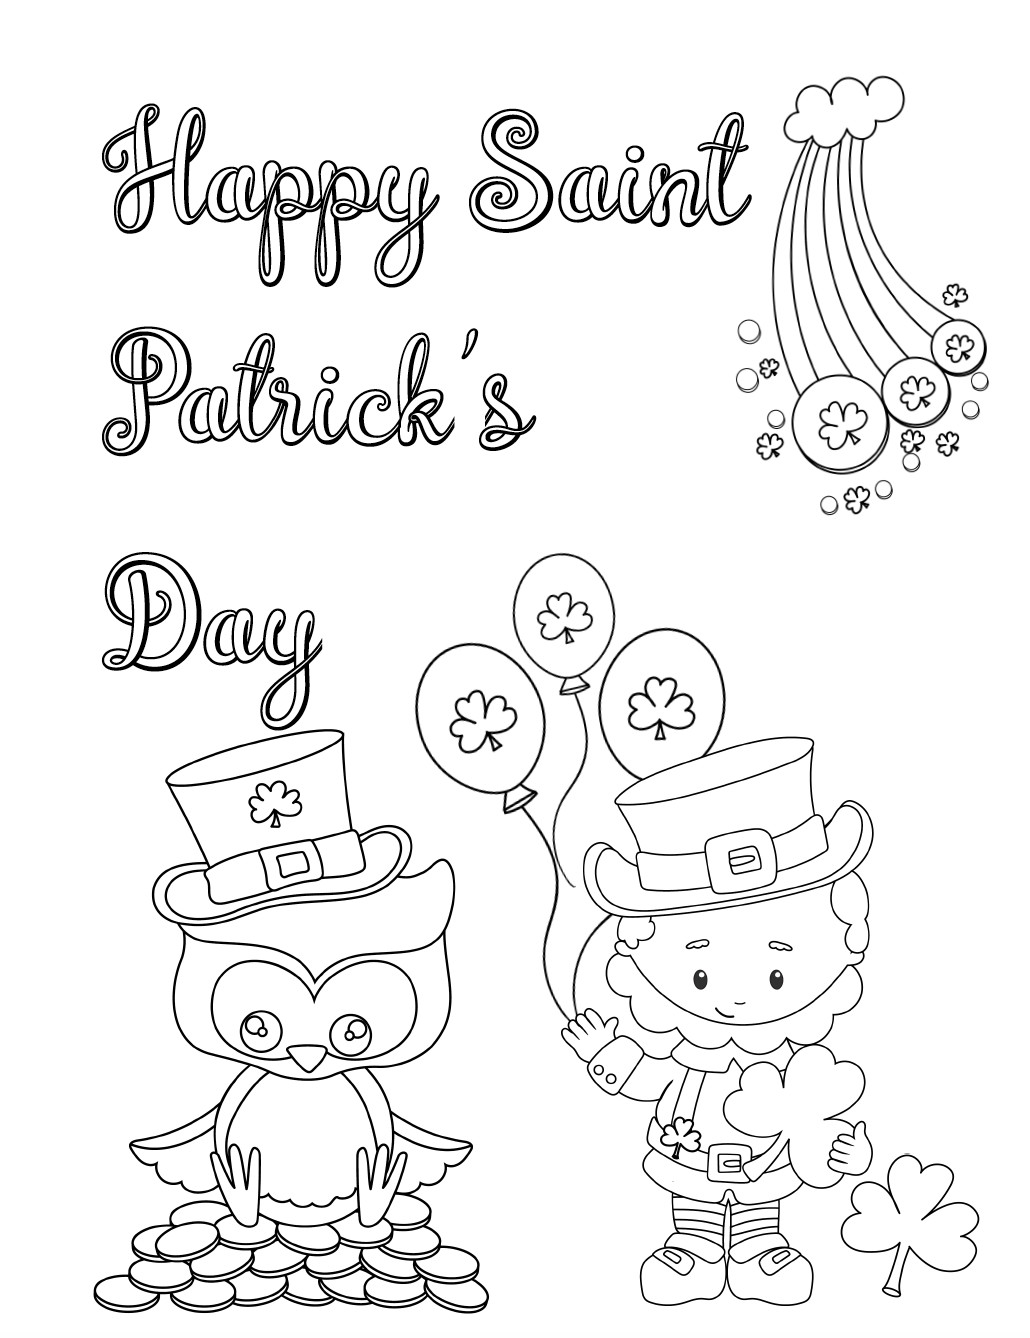 Printable St Patrick'S Day Coloring Pages
 Free Printable St Patrick’s Day Coloring Pages 4 Designs